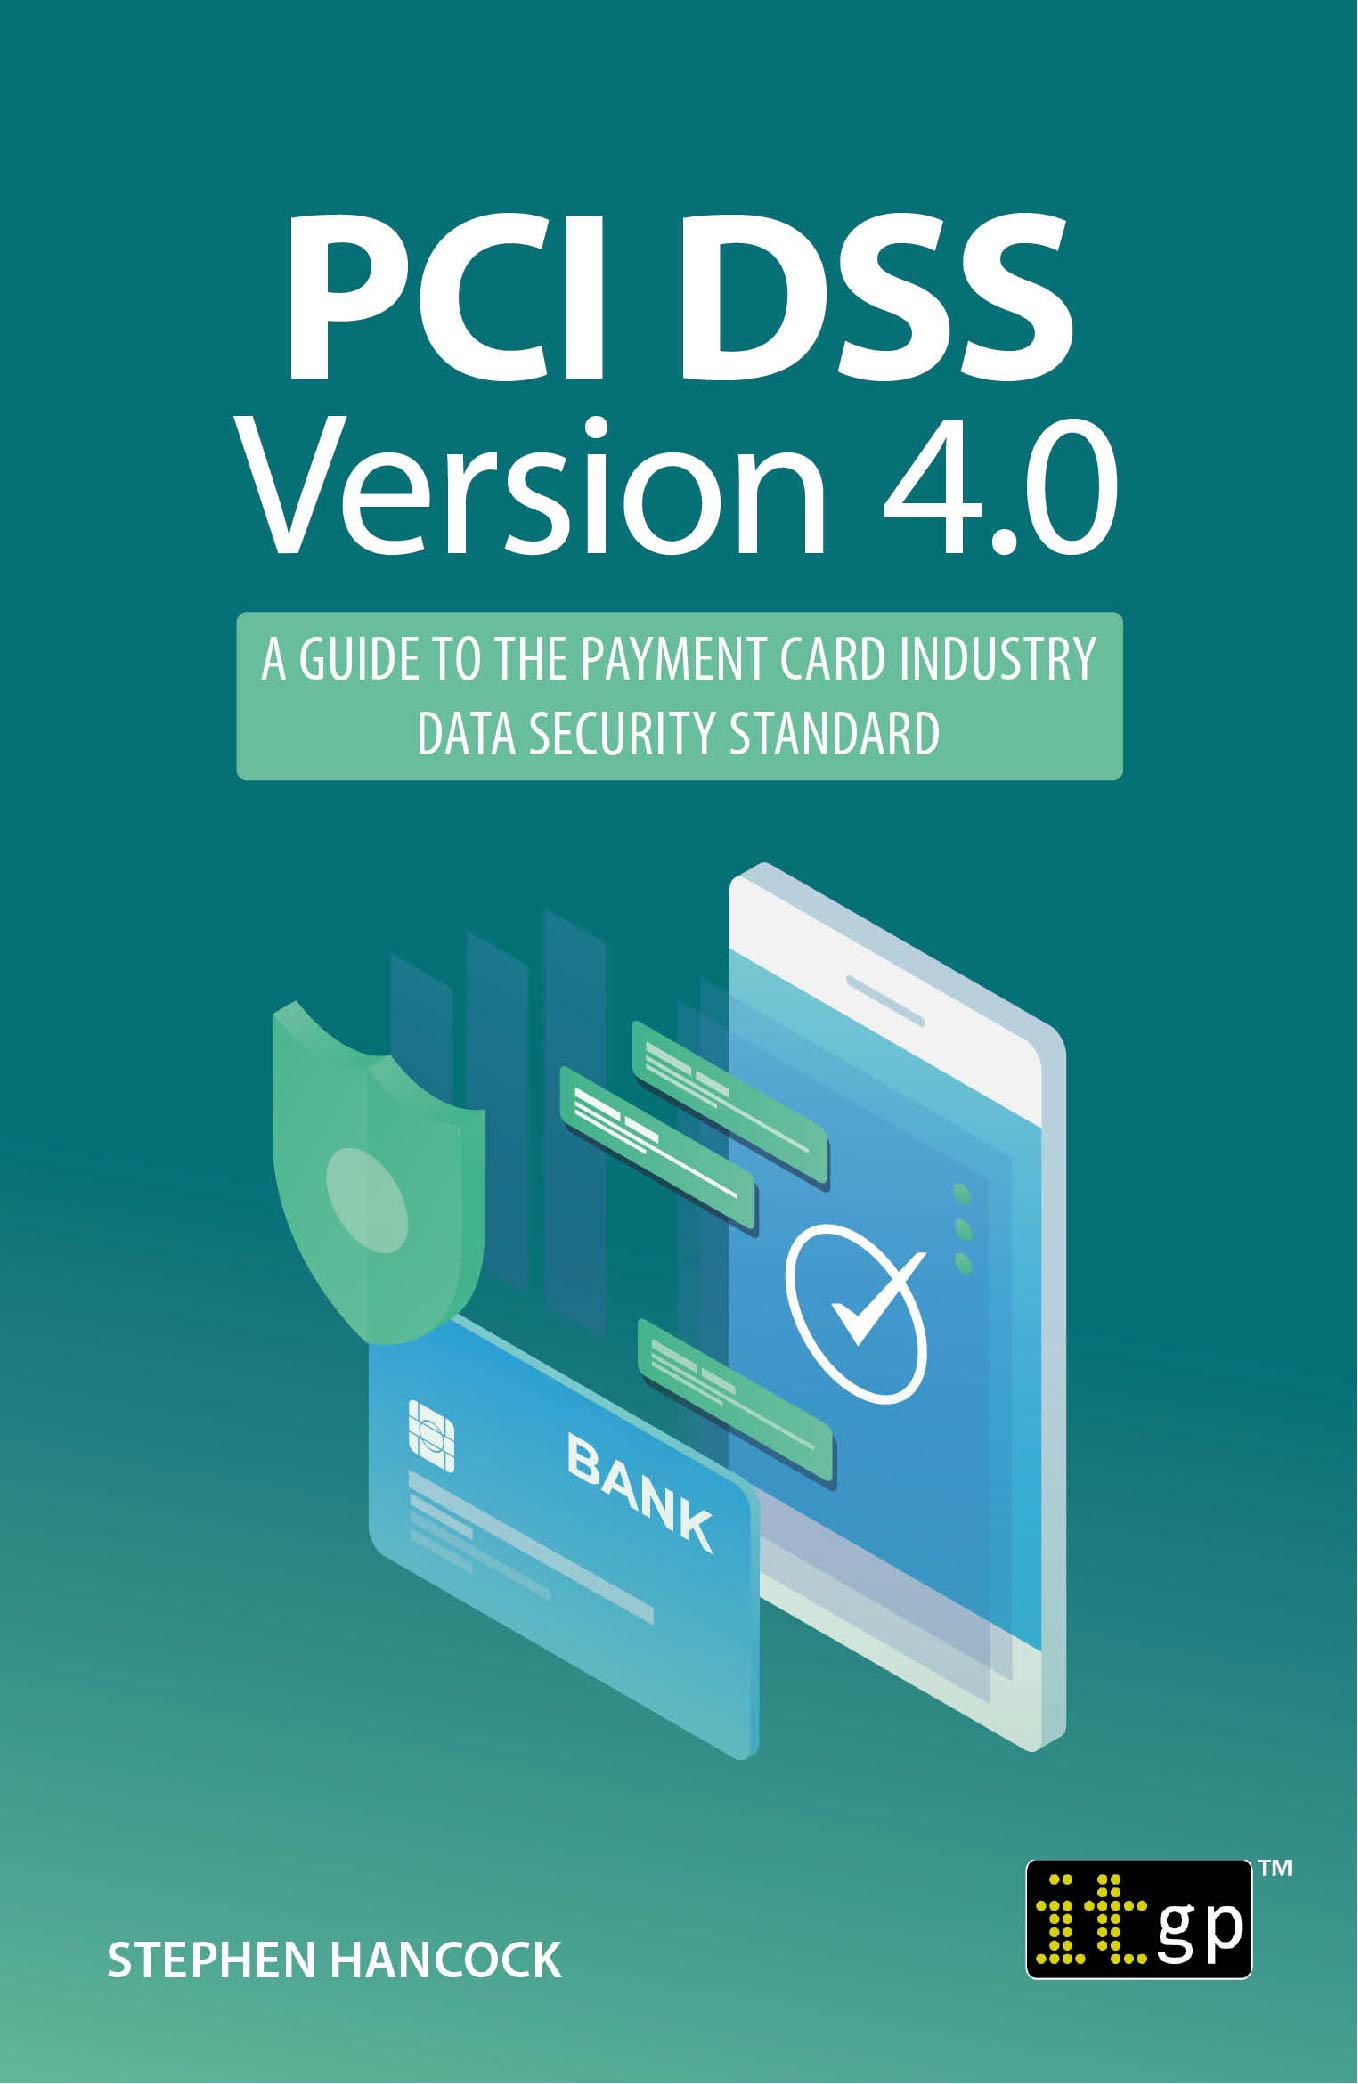 PCI DSS Version 4.0 – A Guide to the Payment Card Industry Data Security Standard